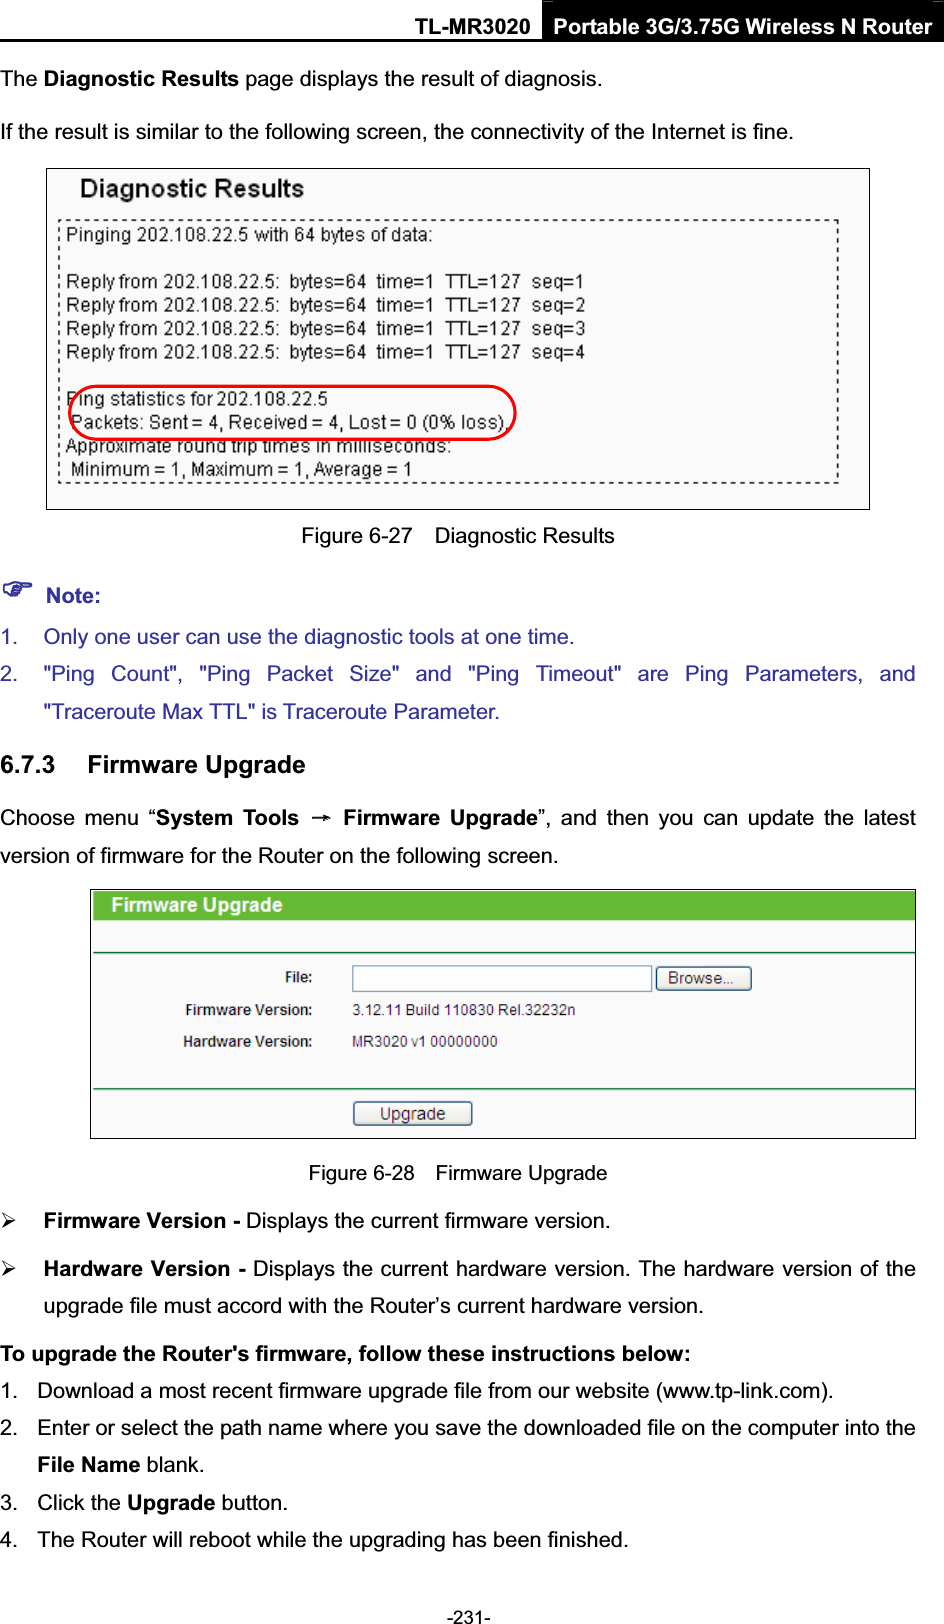 TL-MR3020 Portable 3G/3.75G Wireless N Router-231-The Diagnostic Results page displays the result of diagnosis. If the result is similar to the following screen, the connectivity of the Internet is fine. Figure 6-27    Diagnostic Results )Note:1.  Only one user can use the diagnostic tools at one time.   2.  &quot;Ping  Count&quot;,  &quot;Ping  Packet  Size&quot;  and  &quot;Ping  Timeout&quot;  are  Ping  Parameters,  and &quot;Traceroute Max TTL&quot; is Traceroute Parameter.   6.7.3 Firmware Upgrade Choose  menu  “System  Tools  ė  Firmware  Upgrade”,  and  then  you  can  update  the  latest version of firmware for the Router on the following screen. Figure 6-28    Firmware Upgrade¾Firmware Version - Displays the current firmware version. ¾Hardware Version - Displays the current hardware version. The hardware version of the upgrade file must accord with the Router’s current hardware version. To upgrade the Router&apos;s firmware, follow these instructions below: 1.  Download a most recent firmware upgrade file from our website (www.tp-link.com).   2.  Enter or select the path name where you save the downloaded file on the computer into the File Name blank.   3.  Click the Upgrade button.   4.  The Router will reboot while the upgrading has been finished.   